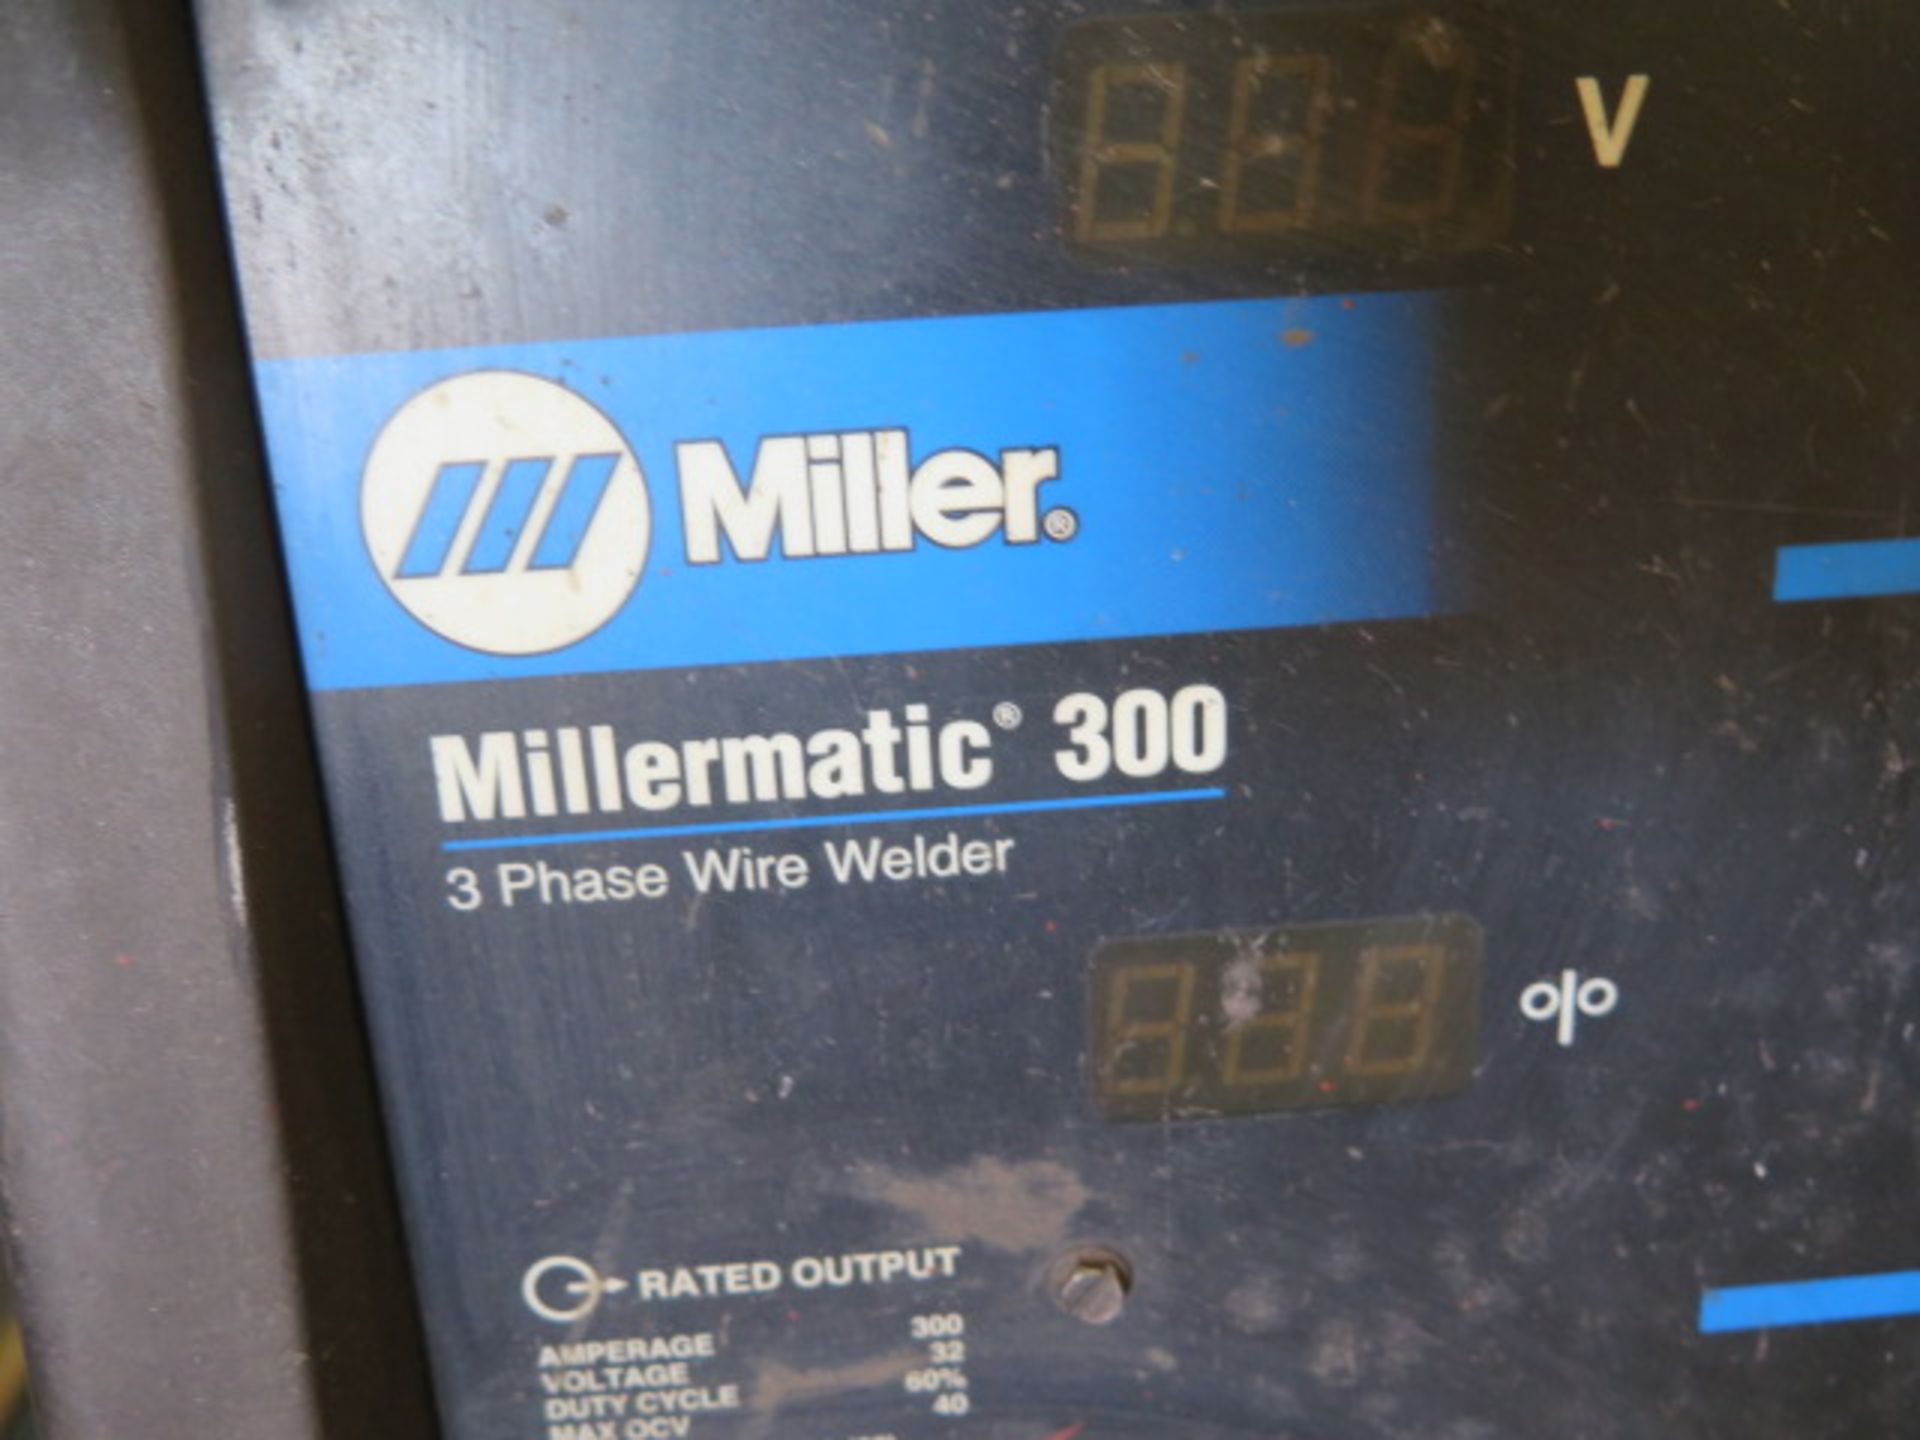 Miller Millermatic 300 Arc Welding Power Source / Wire Feeder (SOLD AS-IS - NO WARRANTY) - Image 6 of 6